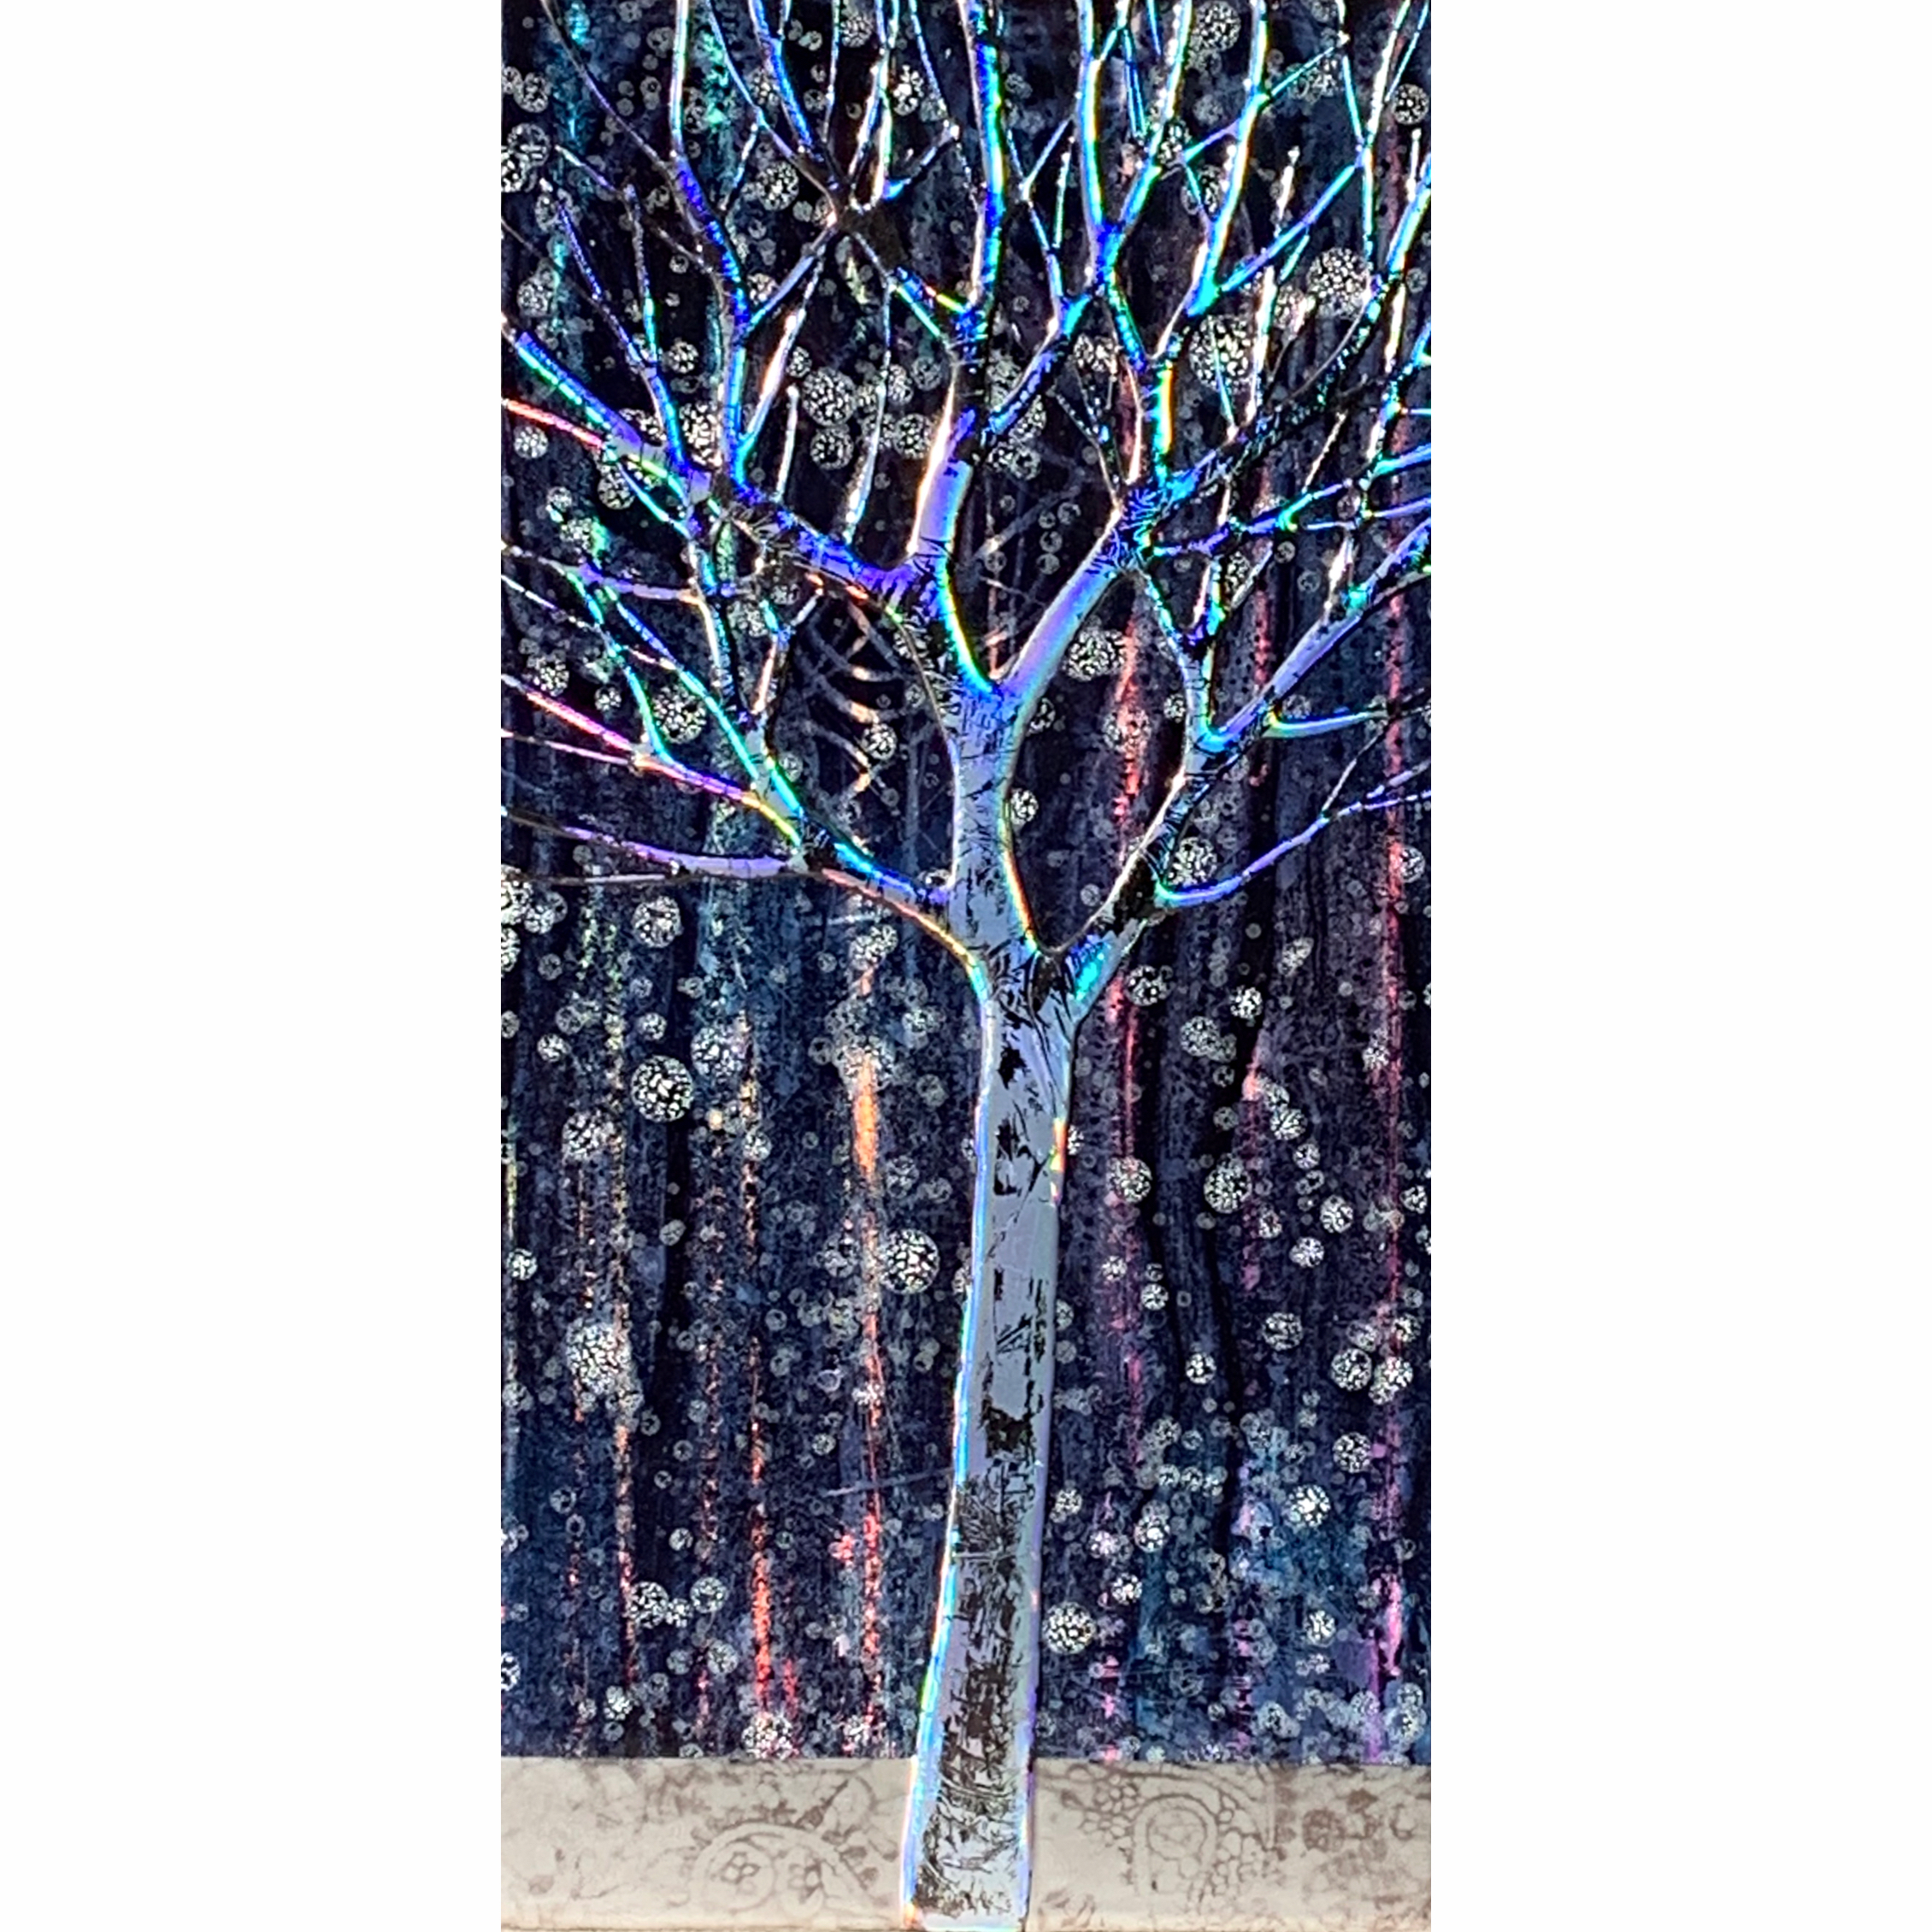 Lil Navy, mixed media holographic tree painting by Sarah Moffat | Effusion Art Gallery + Cast Glass Studio, Invermere BC